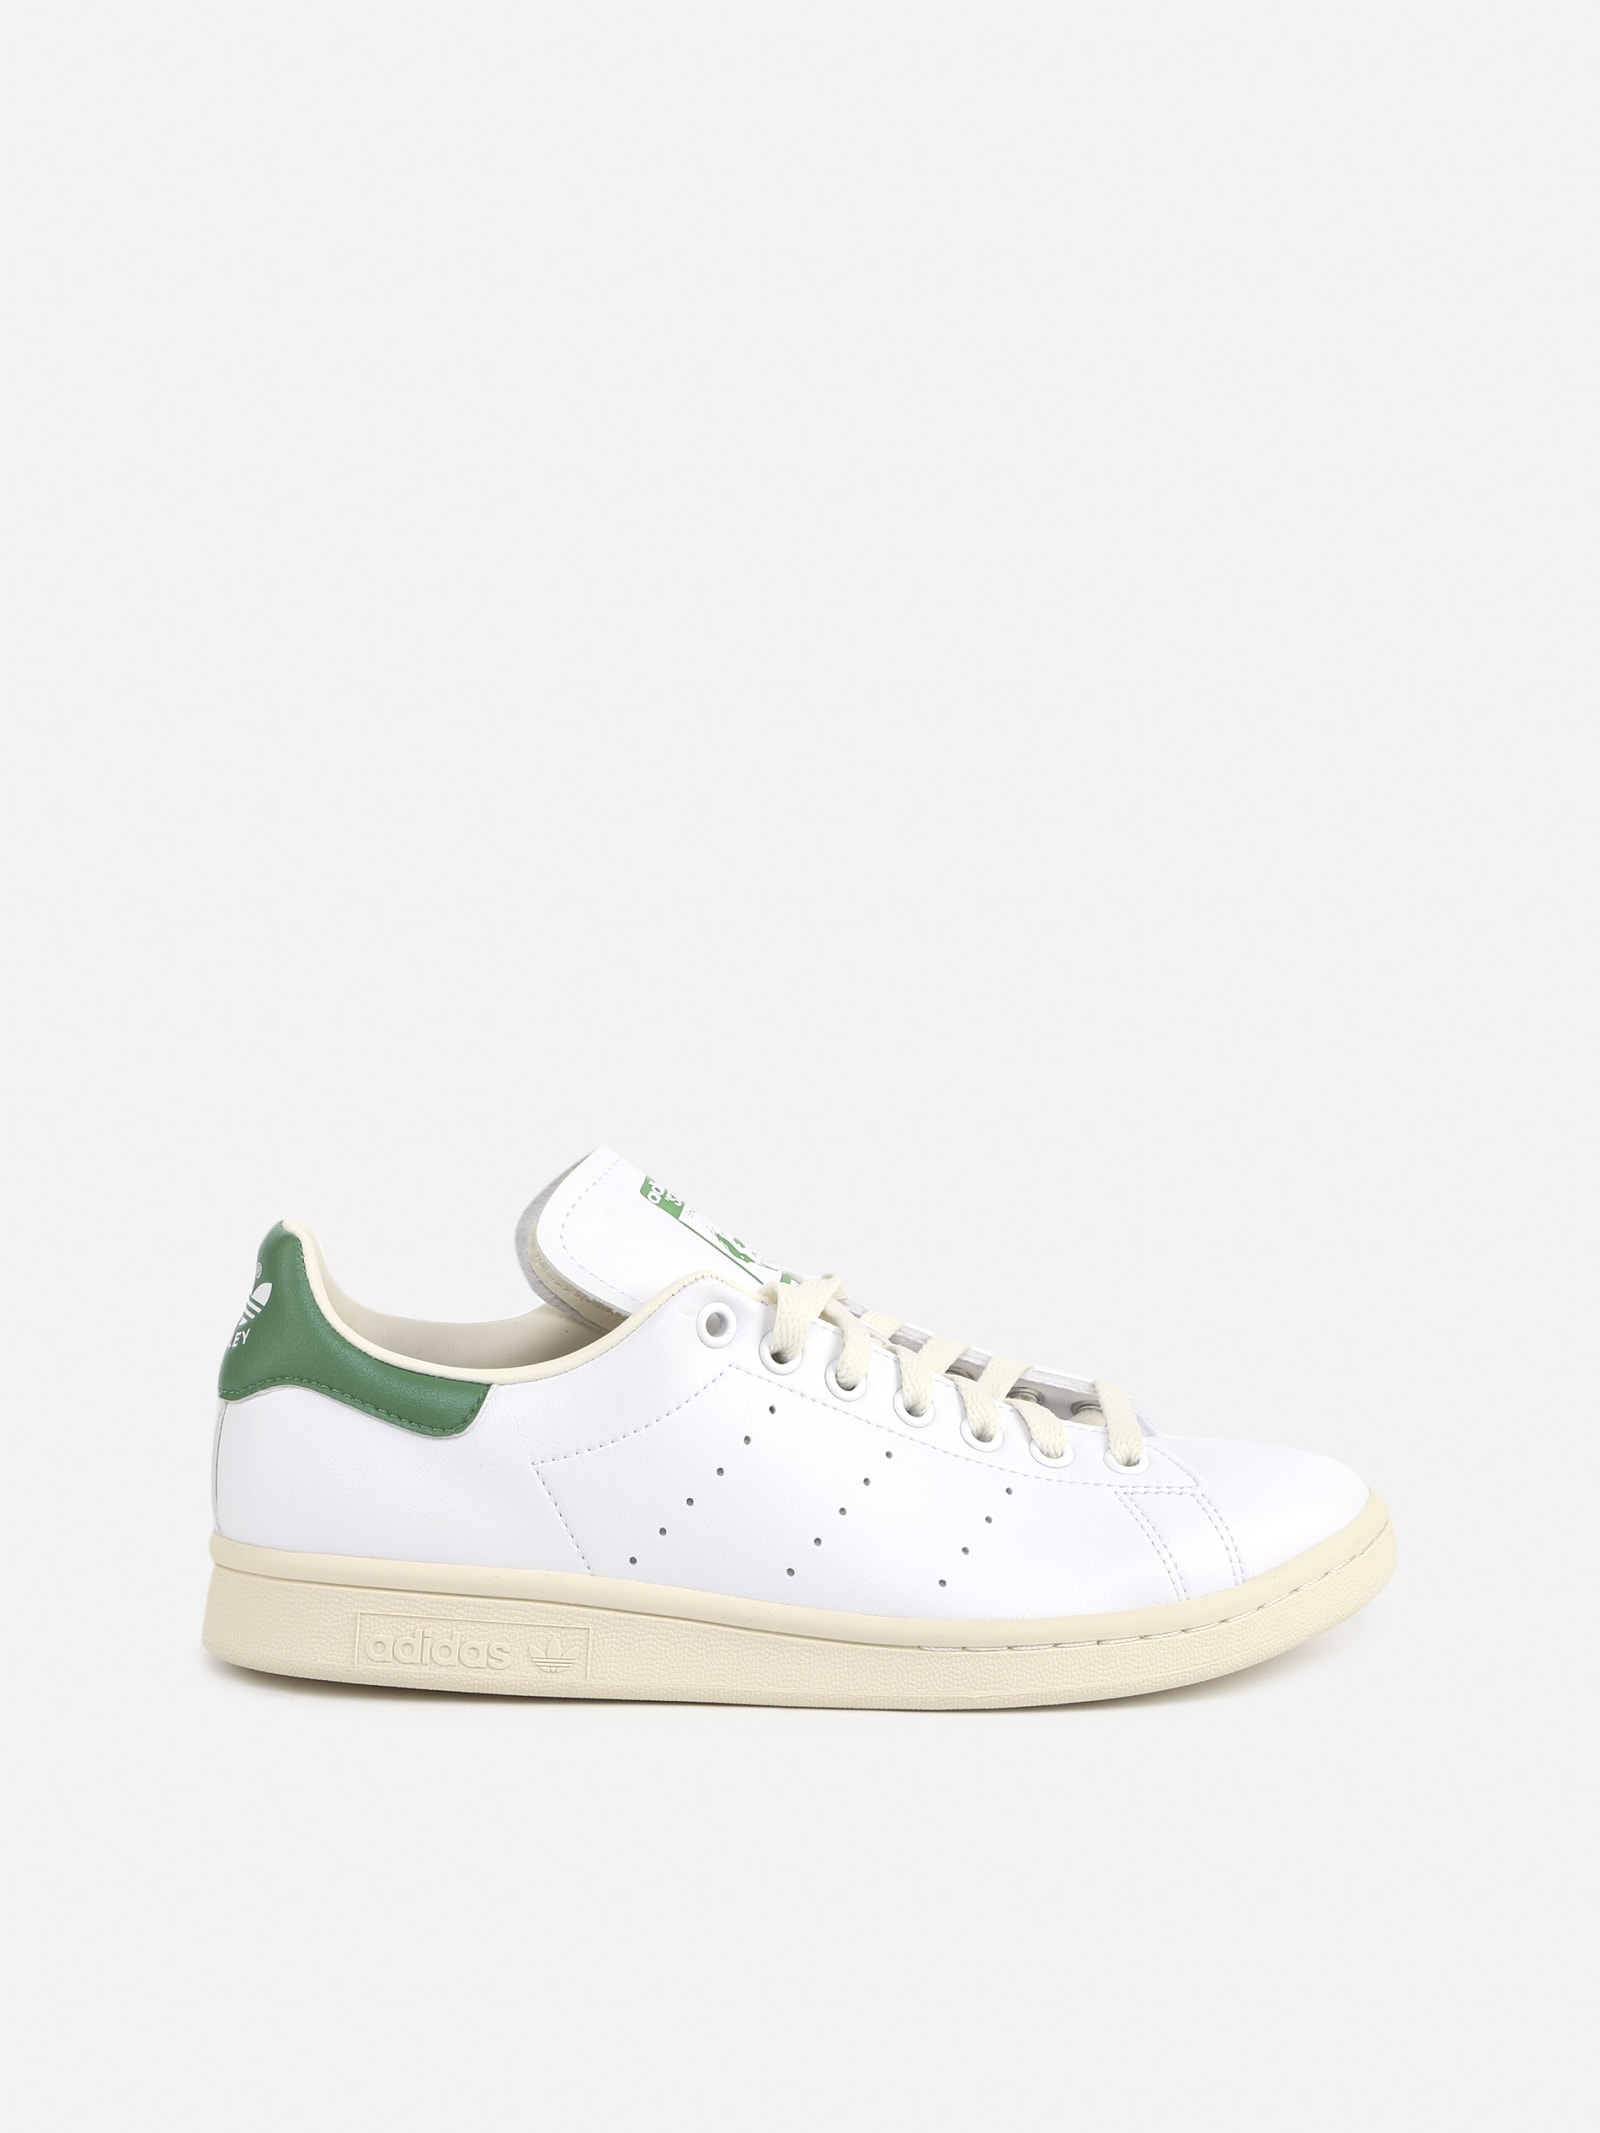 Adidas Originals Stan Smith Trainers With Contrasting Heel Tab